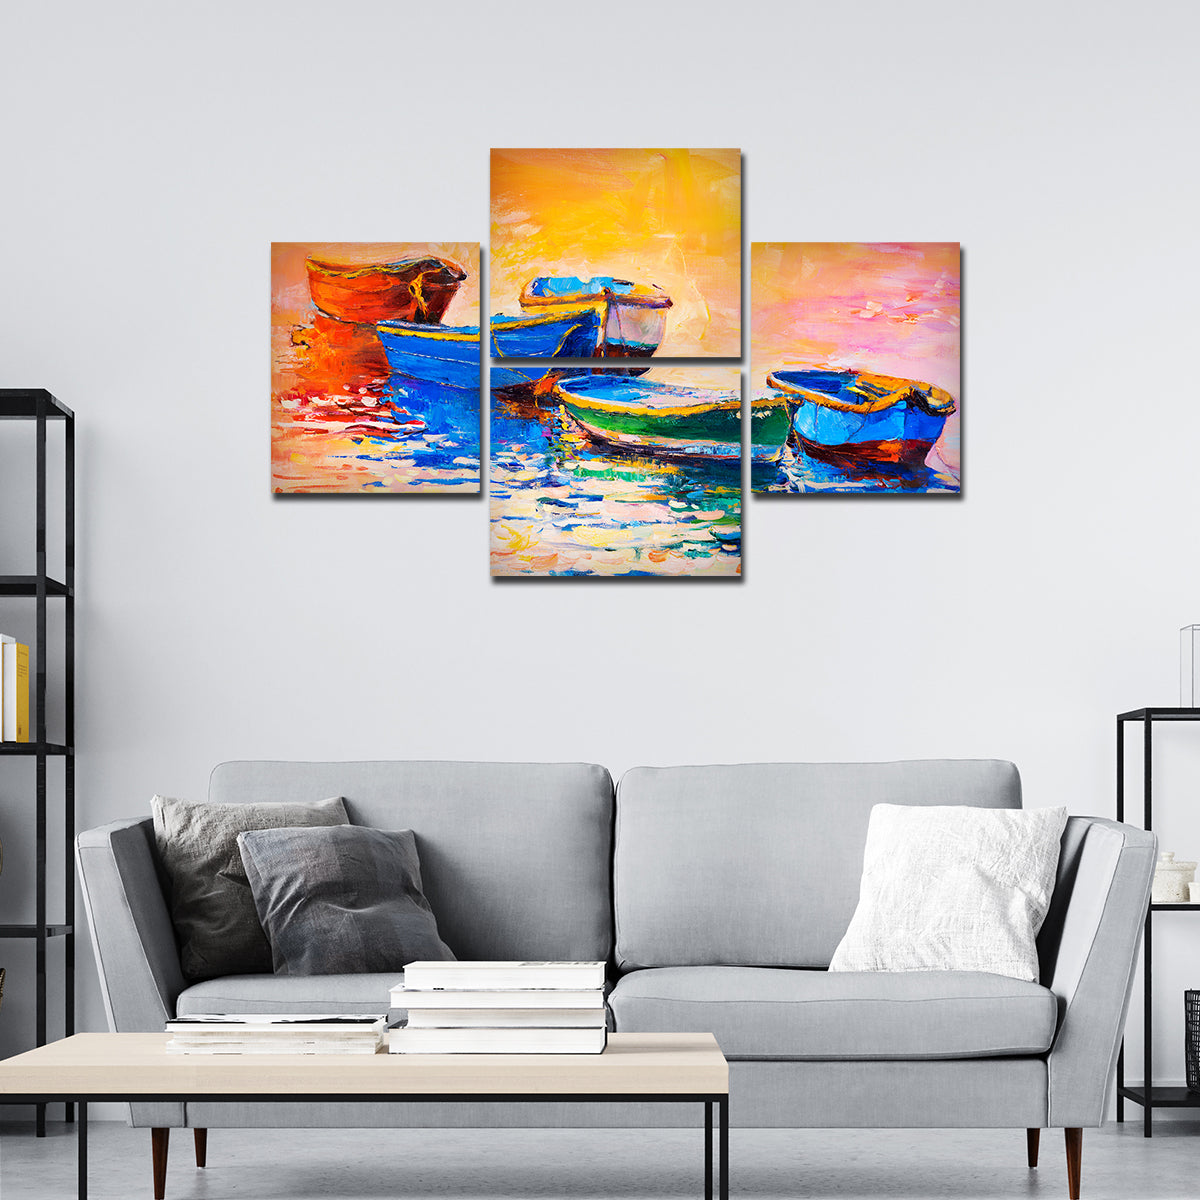  4 Pieces Canvas wall Painting